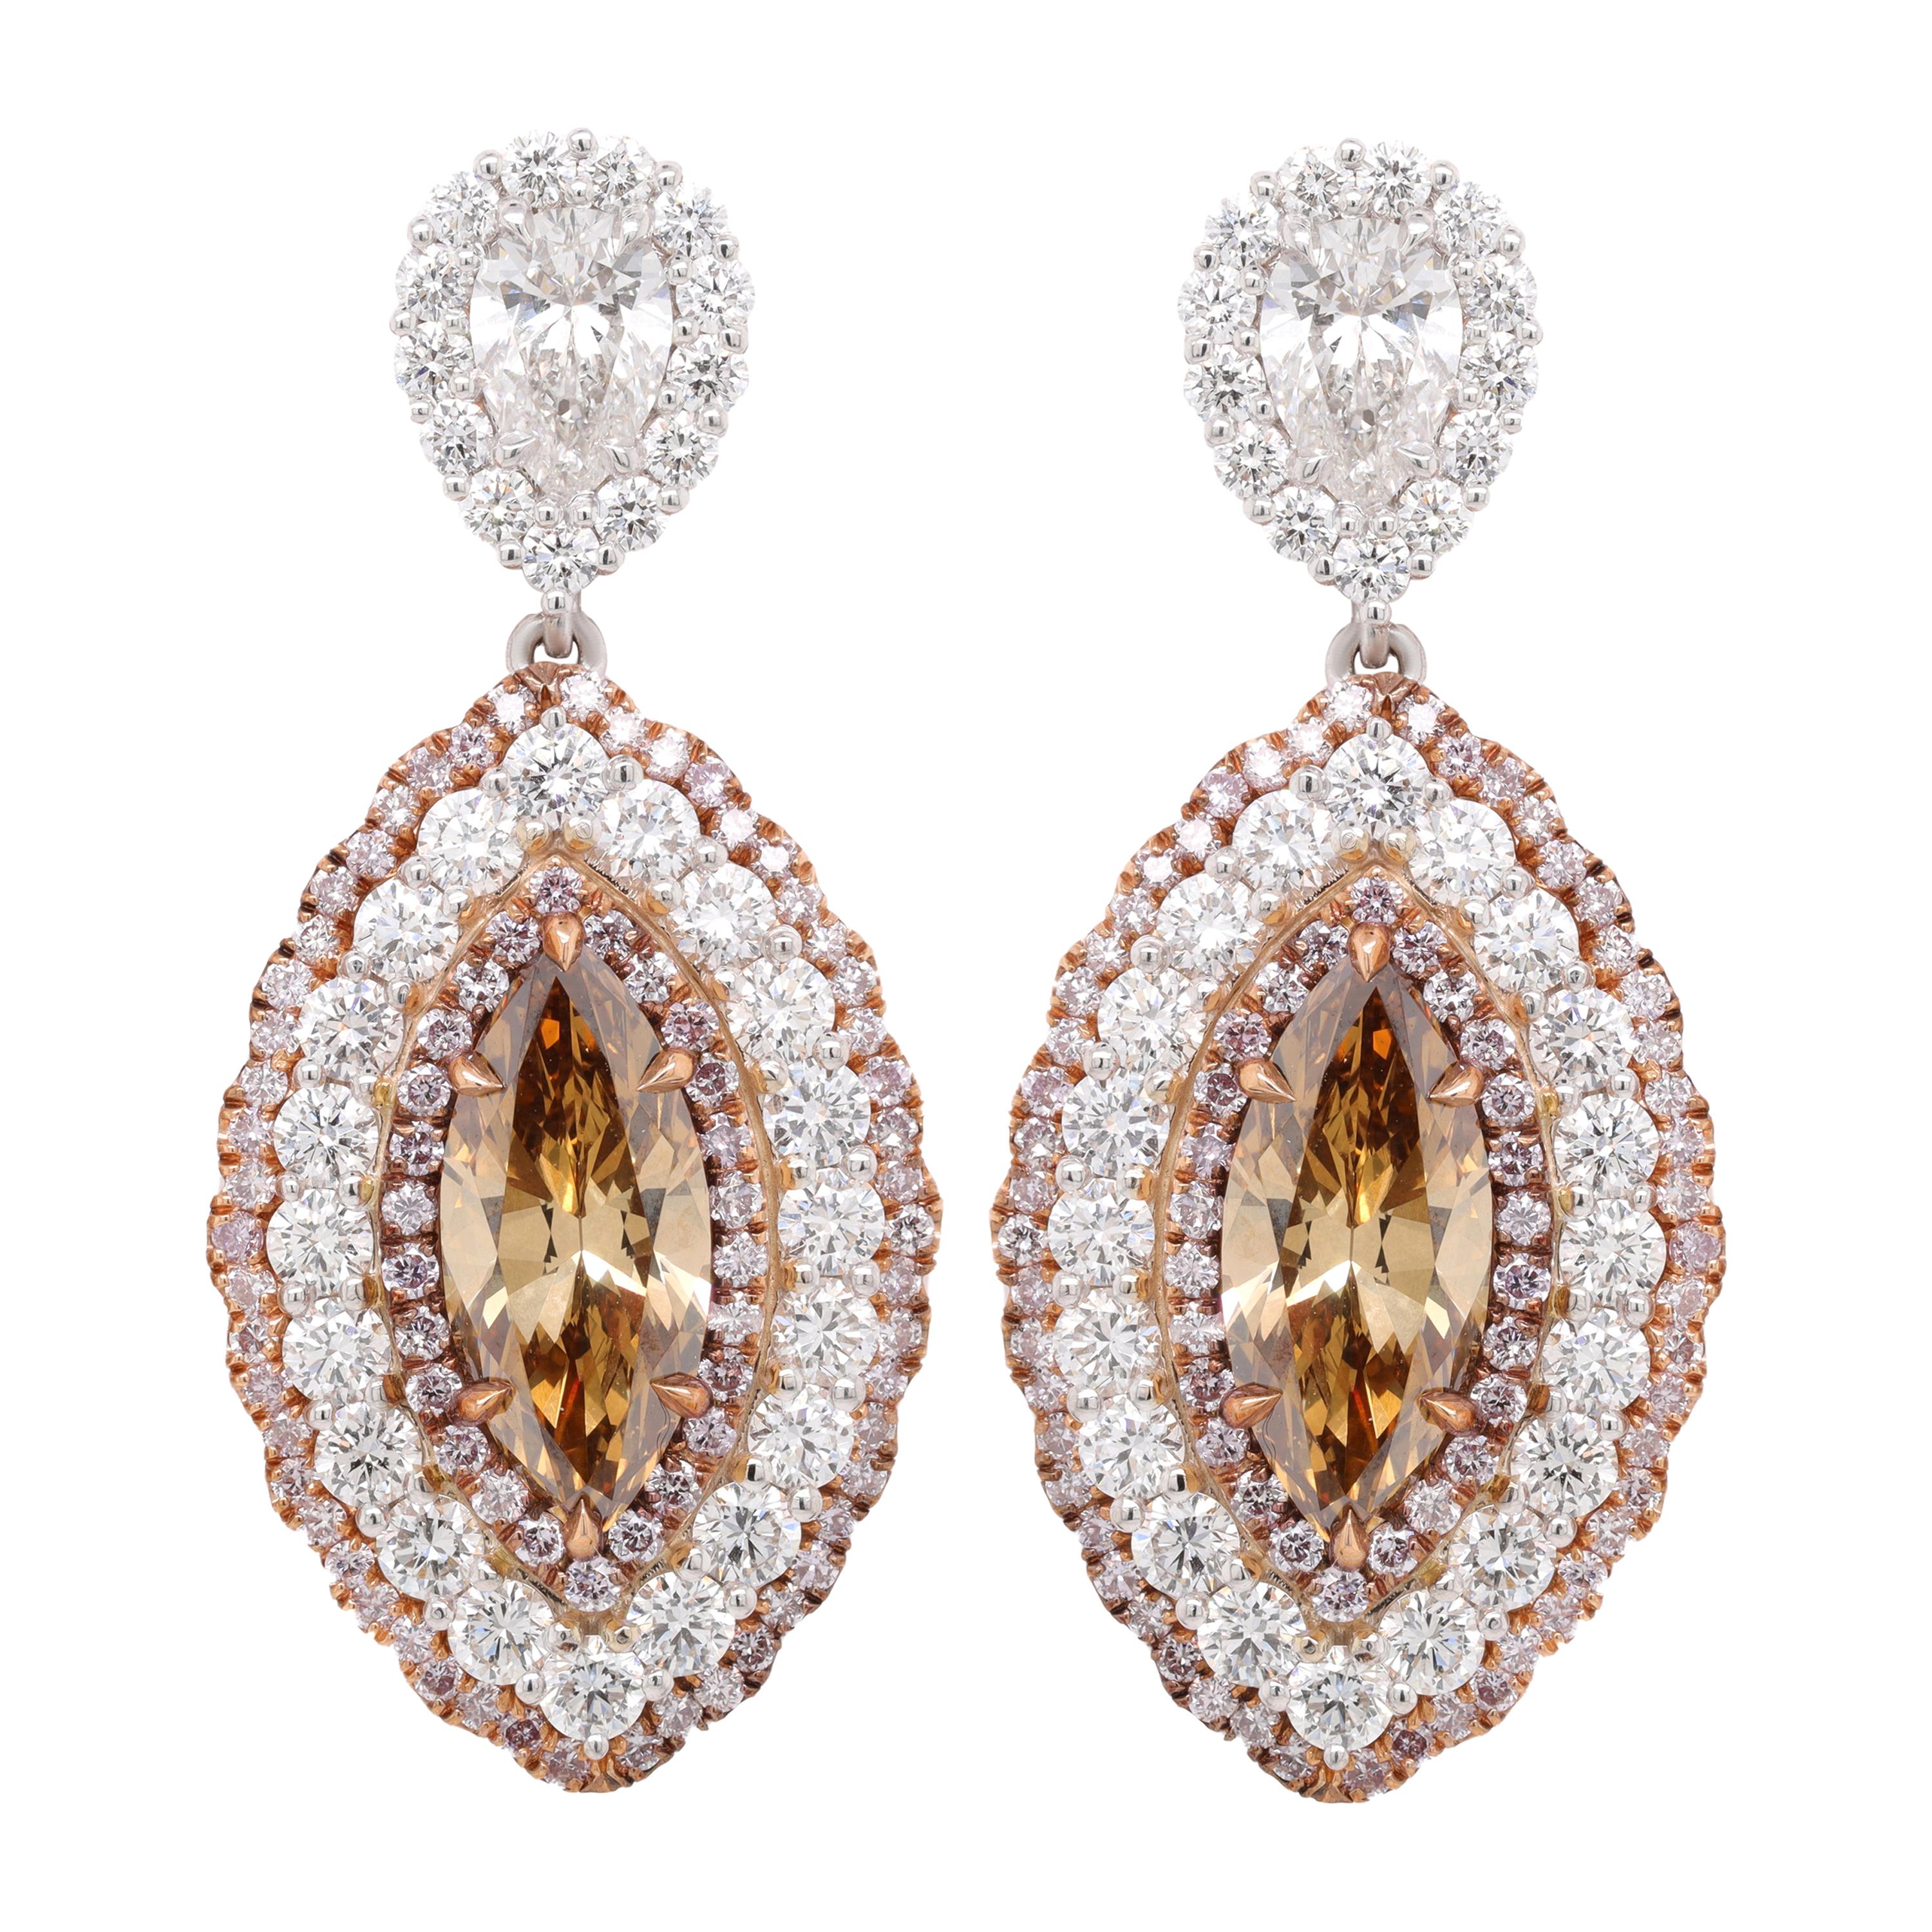 18kt Handmade Earrings with Center Marquise & Pear Shapes Pave Diamond